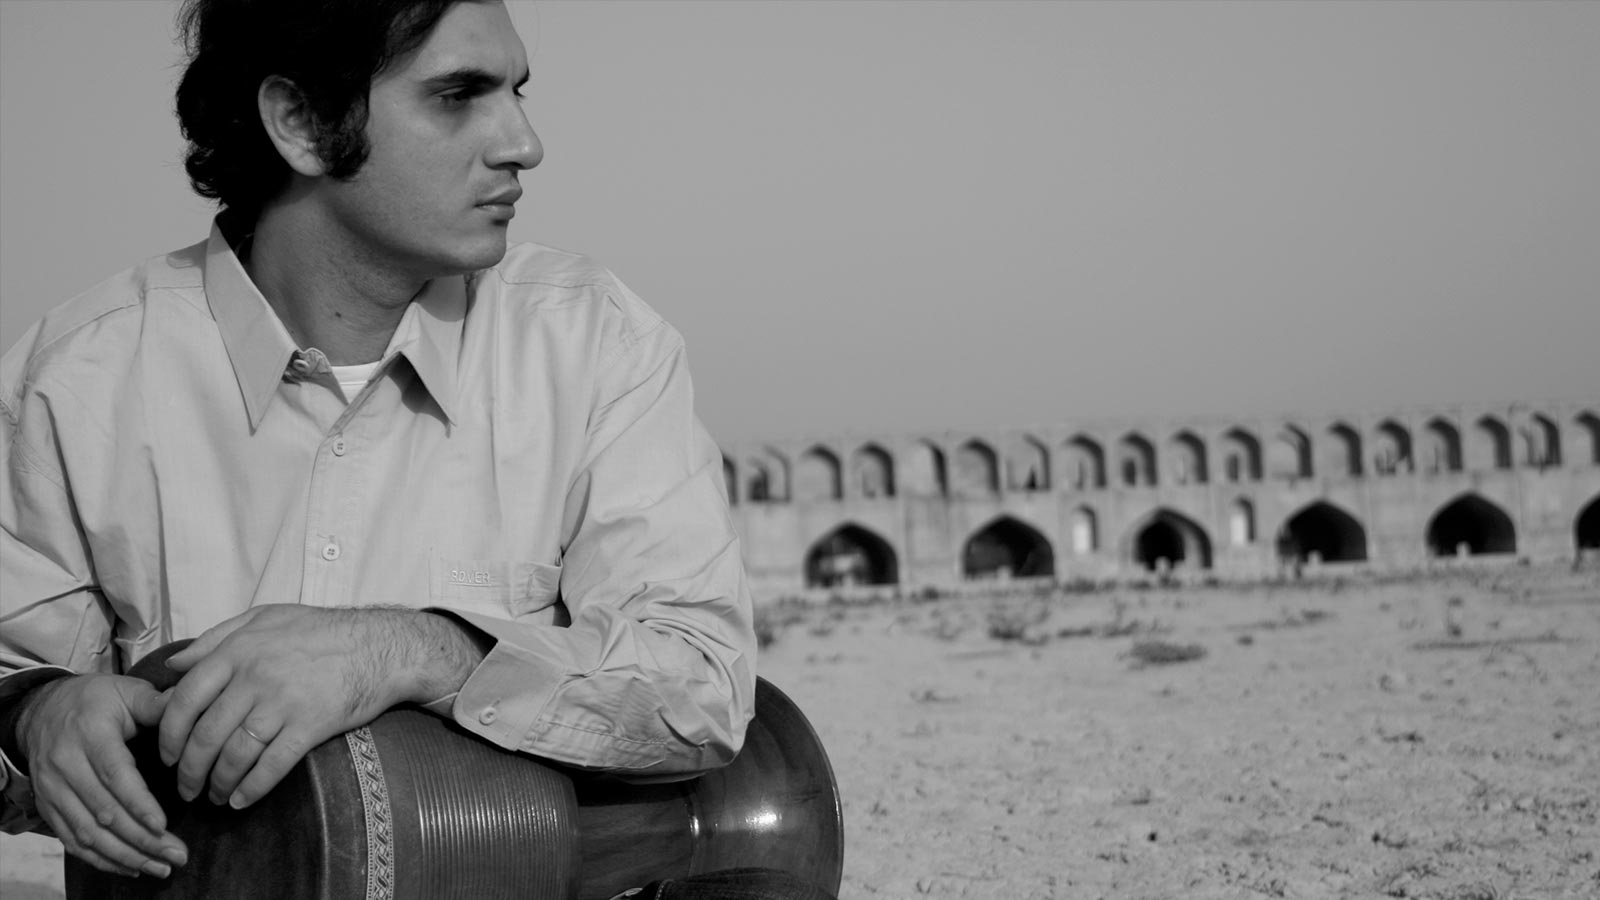 A man in a shirt sat down on sand, holding an instrument.